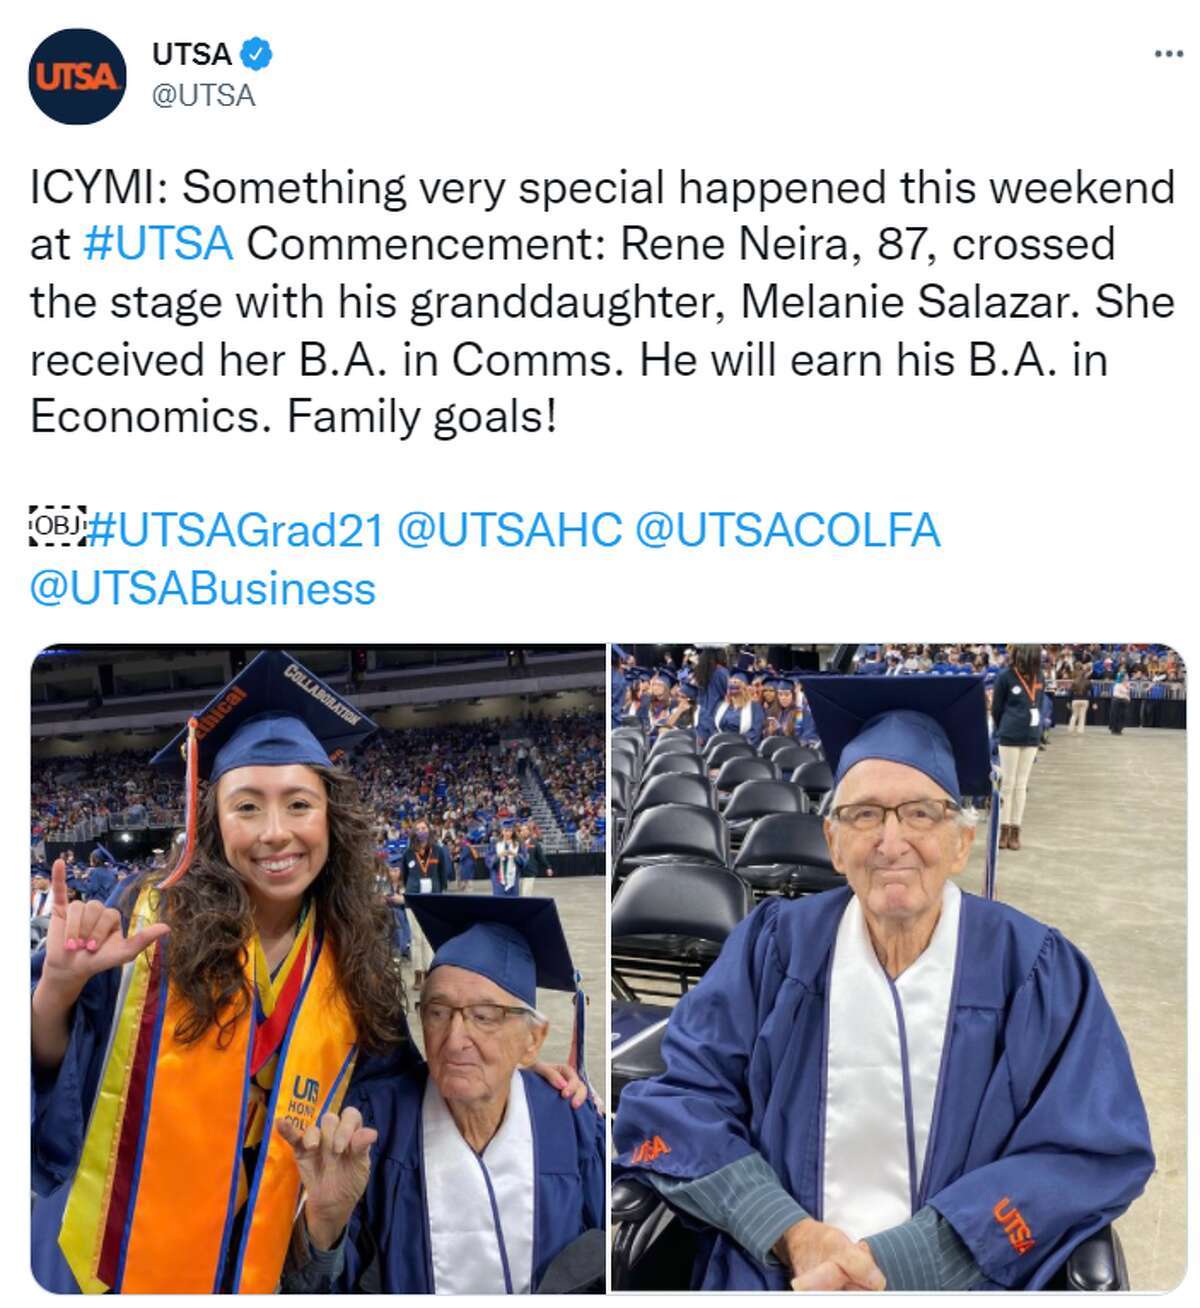 Melanie Salazar, 23, graduated from UTSA with her 88-year-old grandfather, Rene Neira, on Dec. 11.